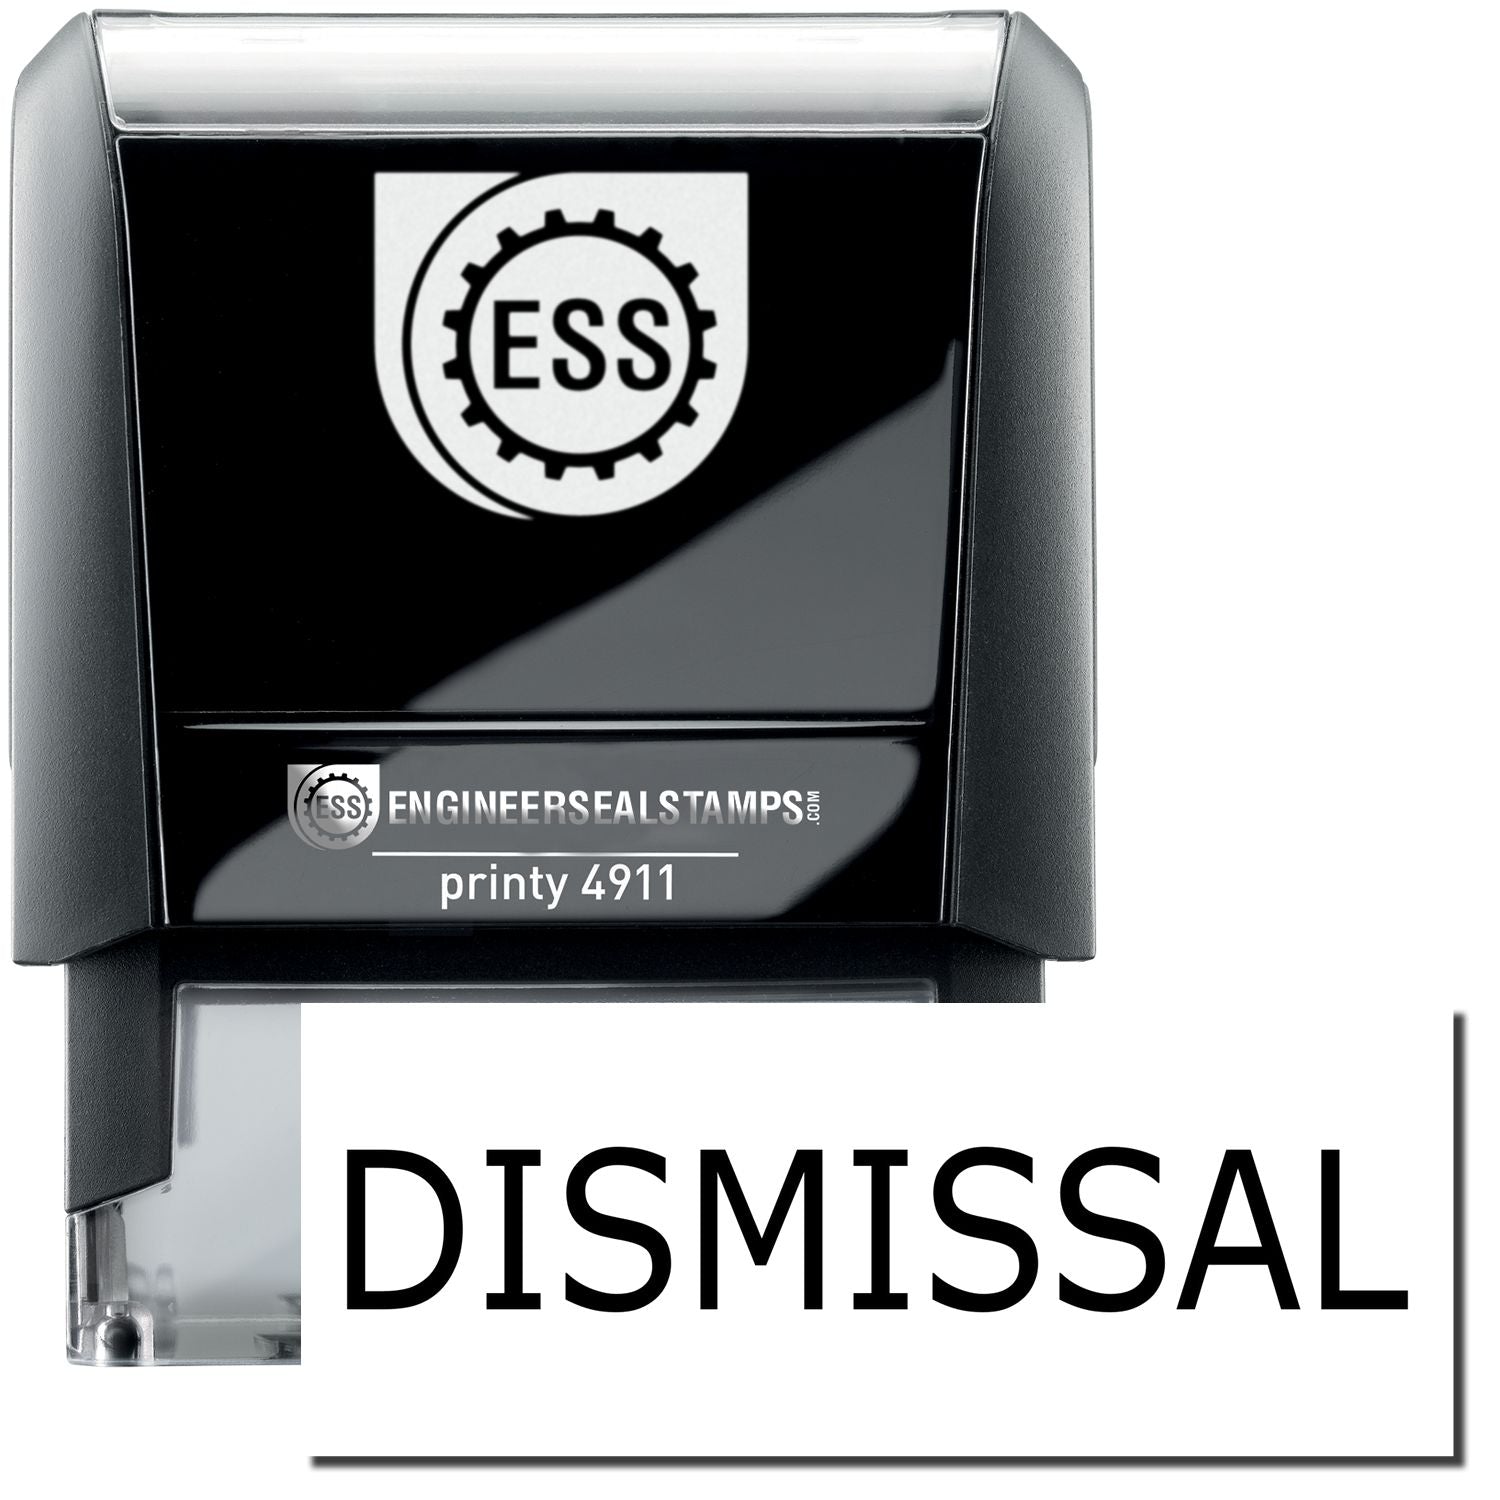 A self-inking stamp with a stamped image showing how the text "DISMISSAL" is displayed after stamping.